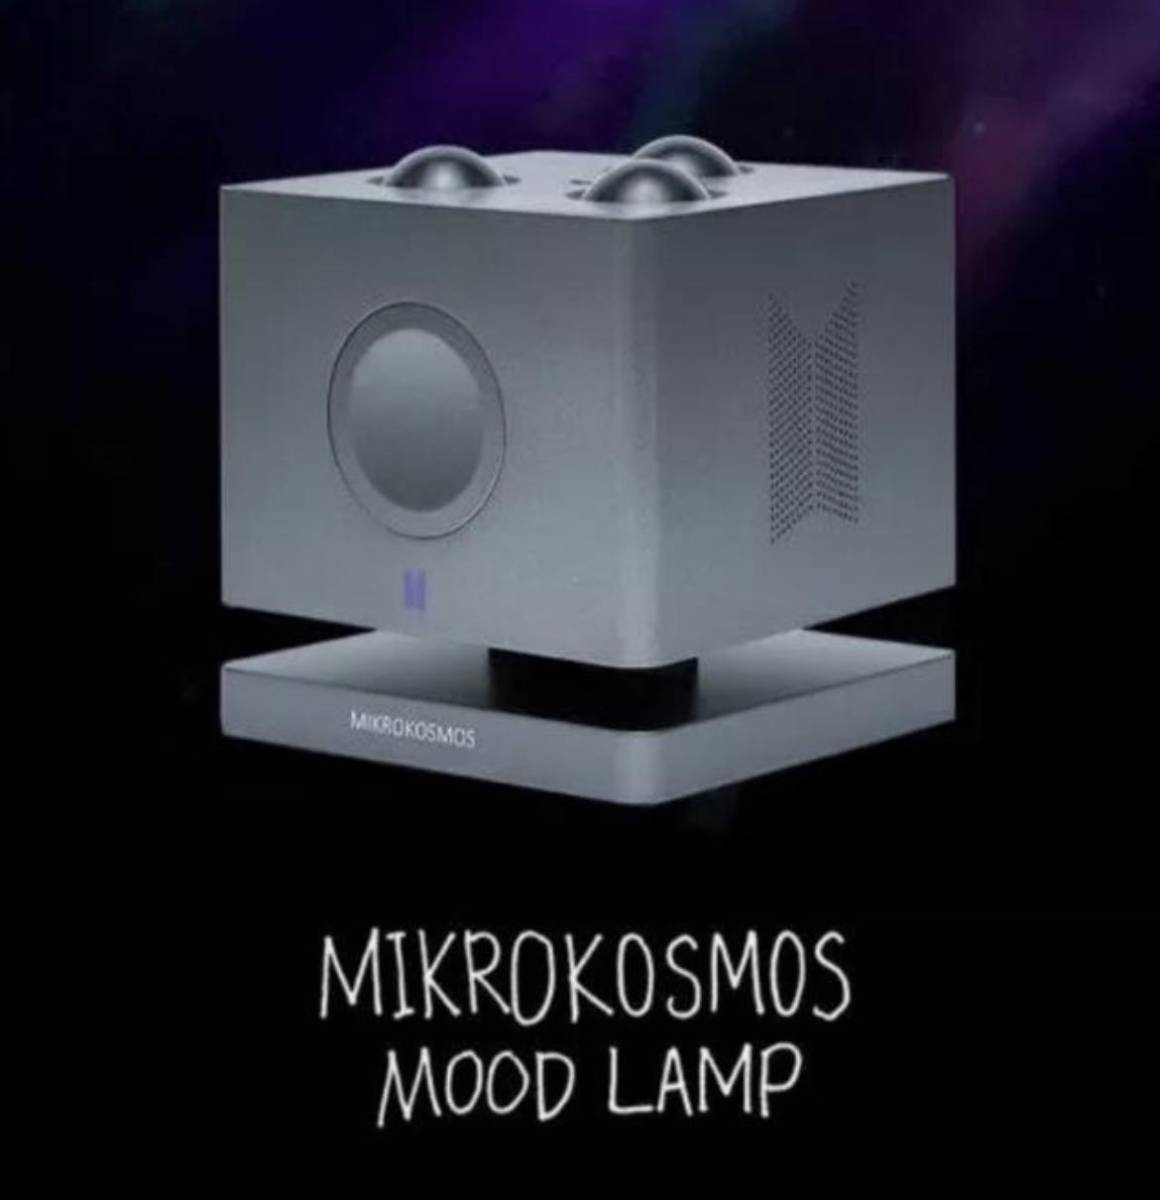 ARTIST-MADE COLLECTION BY BTS [JUNG KOOK] MIKROKOSMOS MOOD LAMP